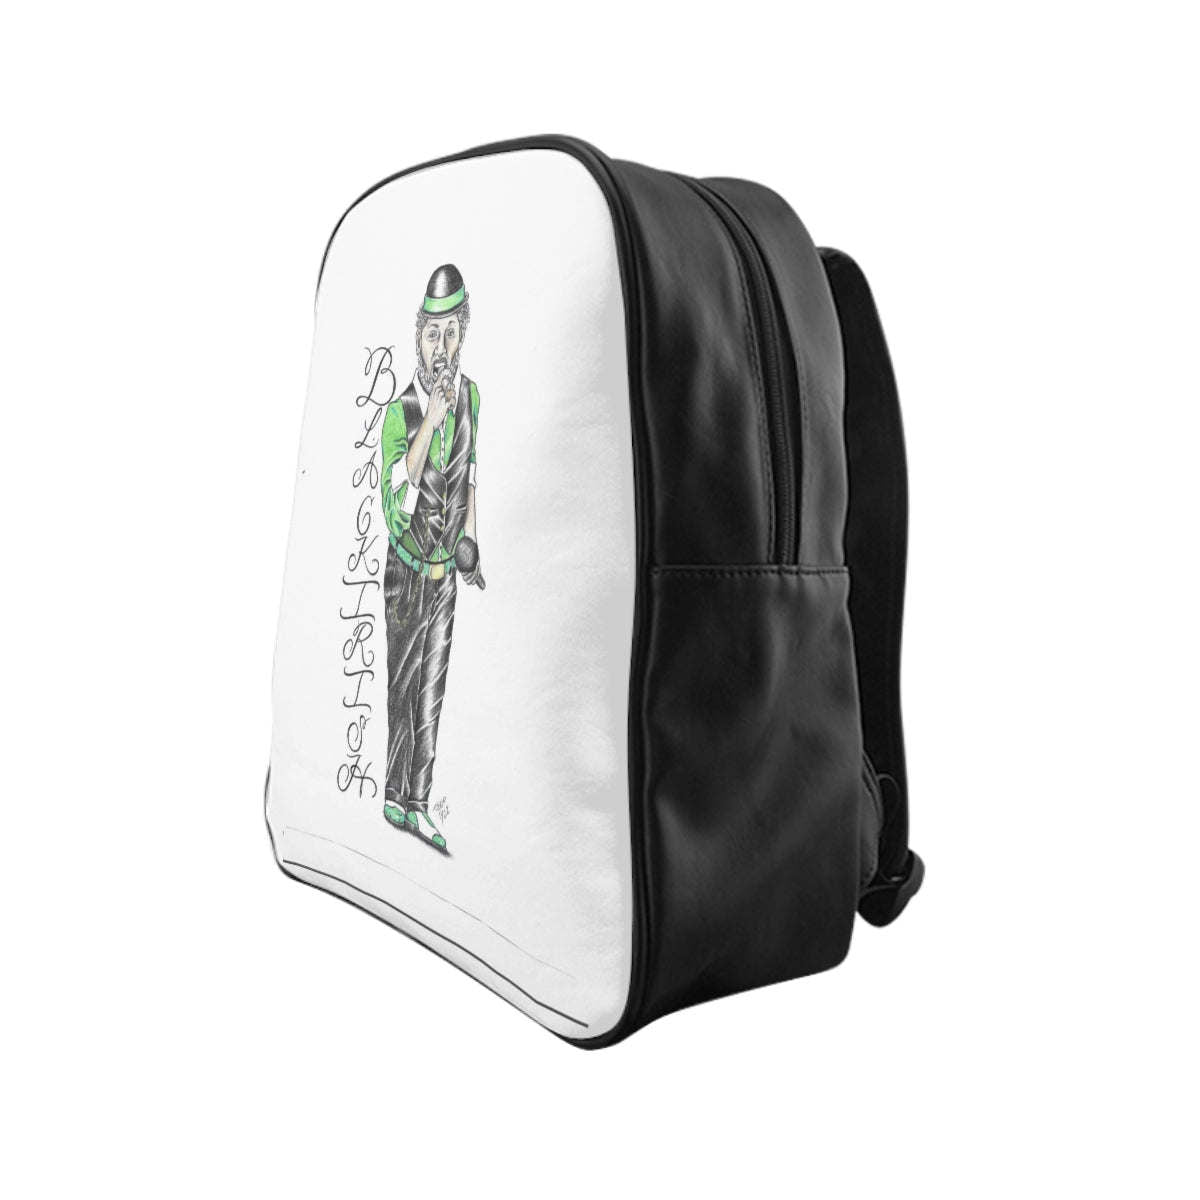 White and Black Irish Backpack 'St Patricks Day' featuring a quality print of a man in a green suit and hat holding a cane.